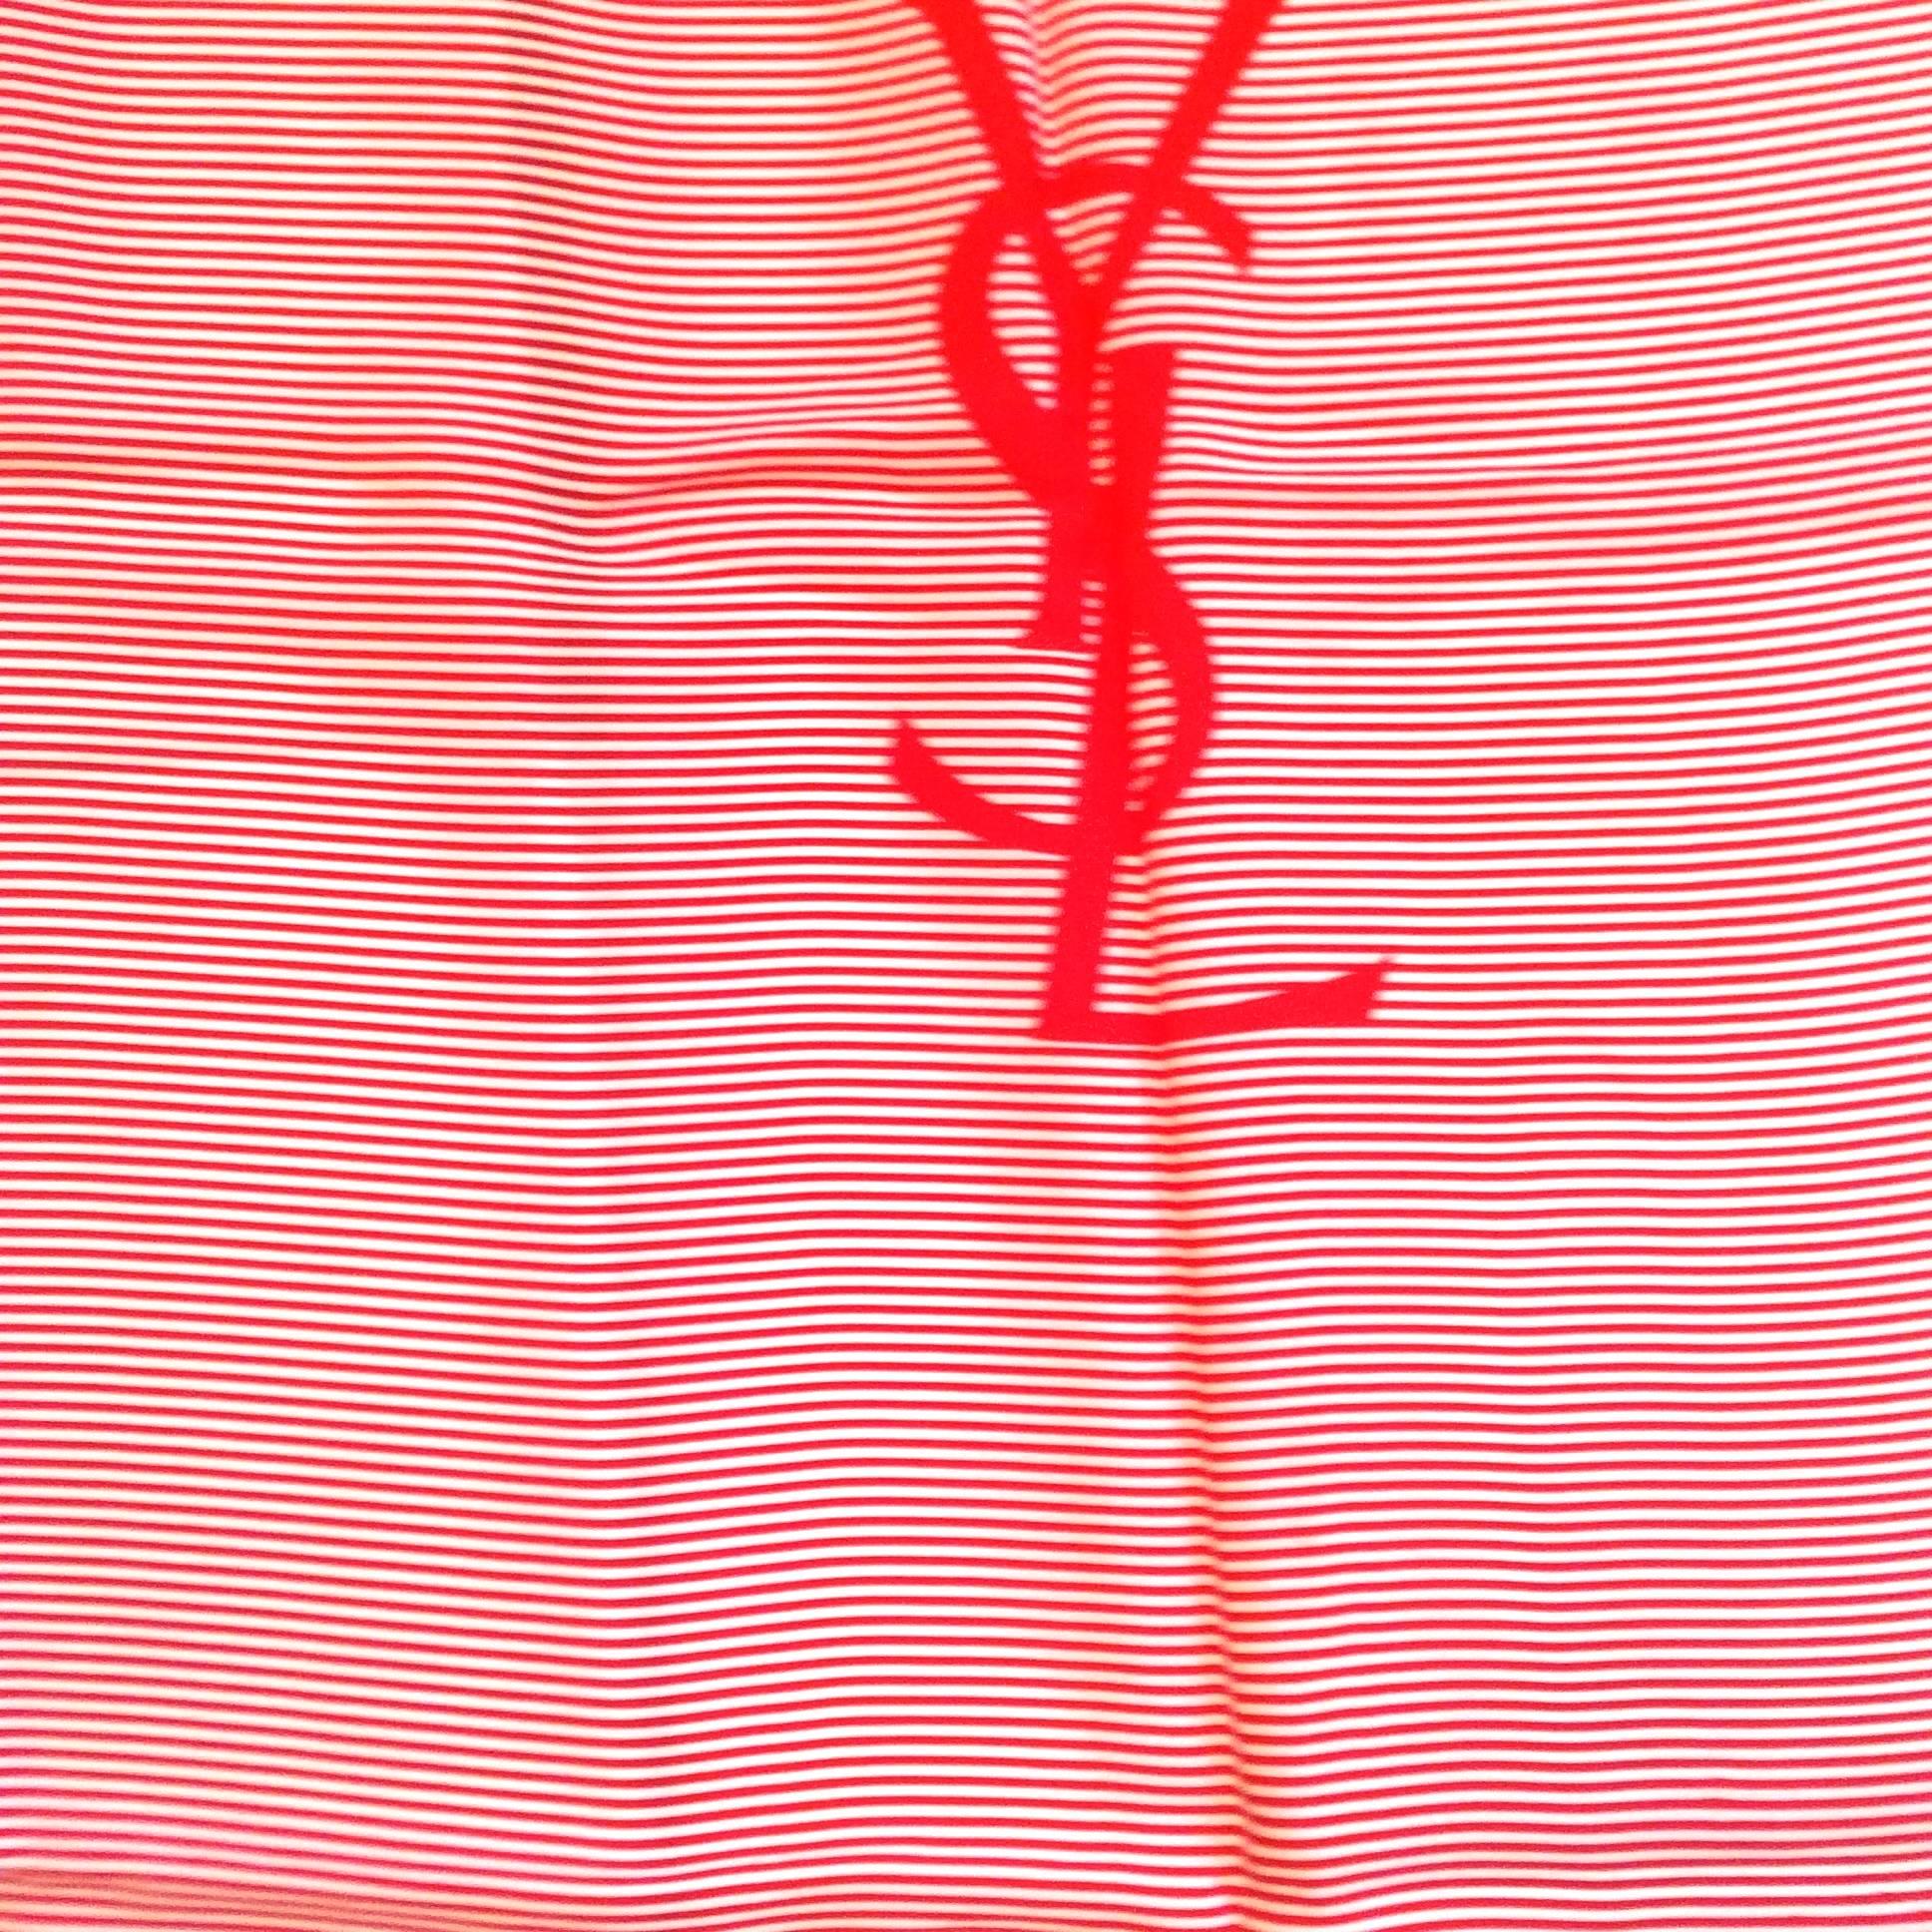 Beige Yves Saint Laurent / YSL - 100% Silk Scarf - 1970's - Red and White For Sale